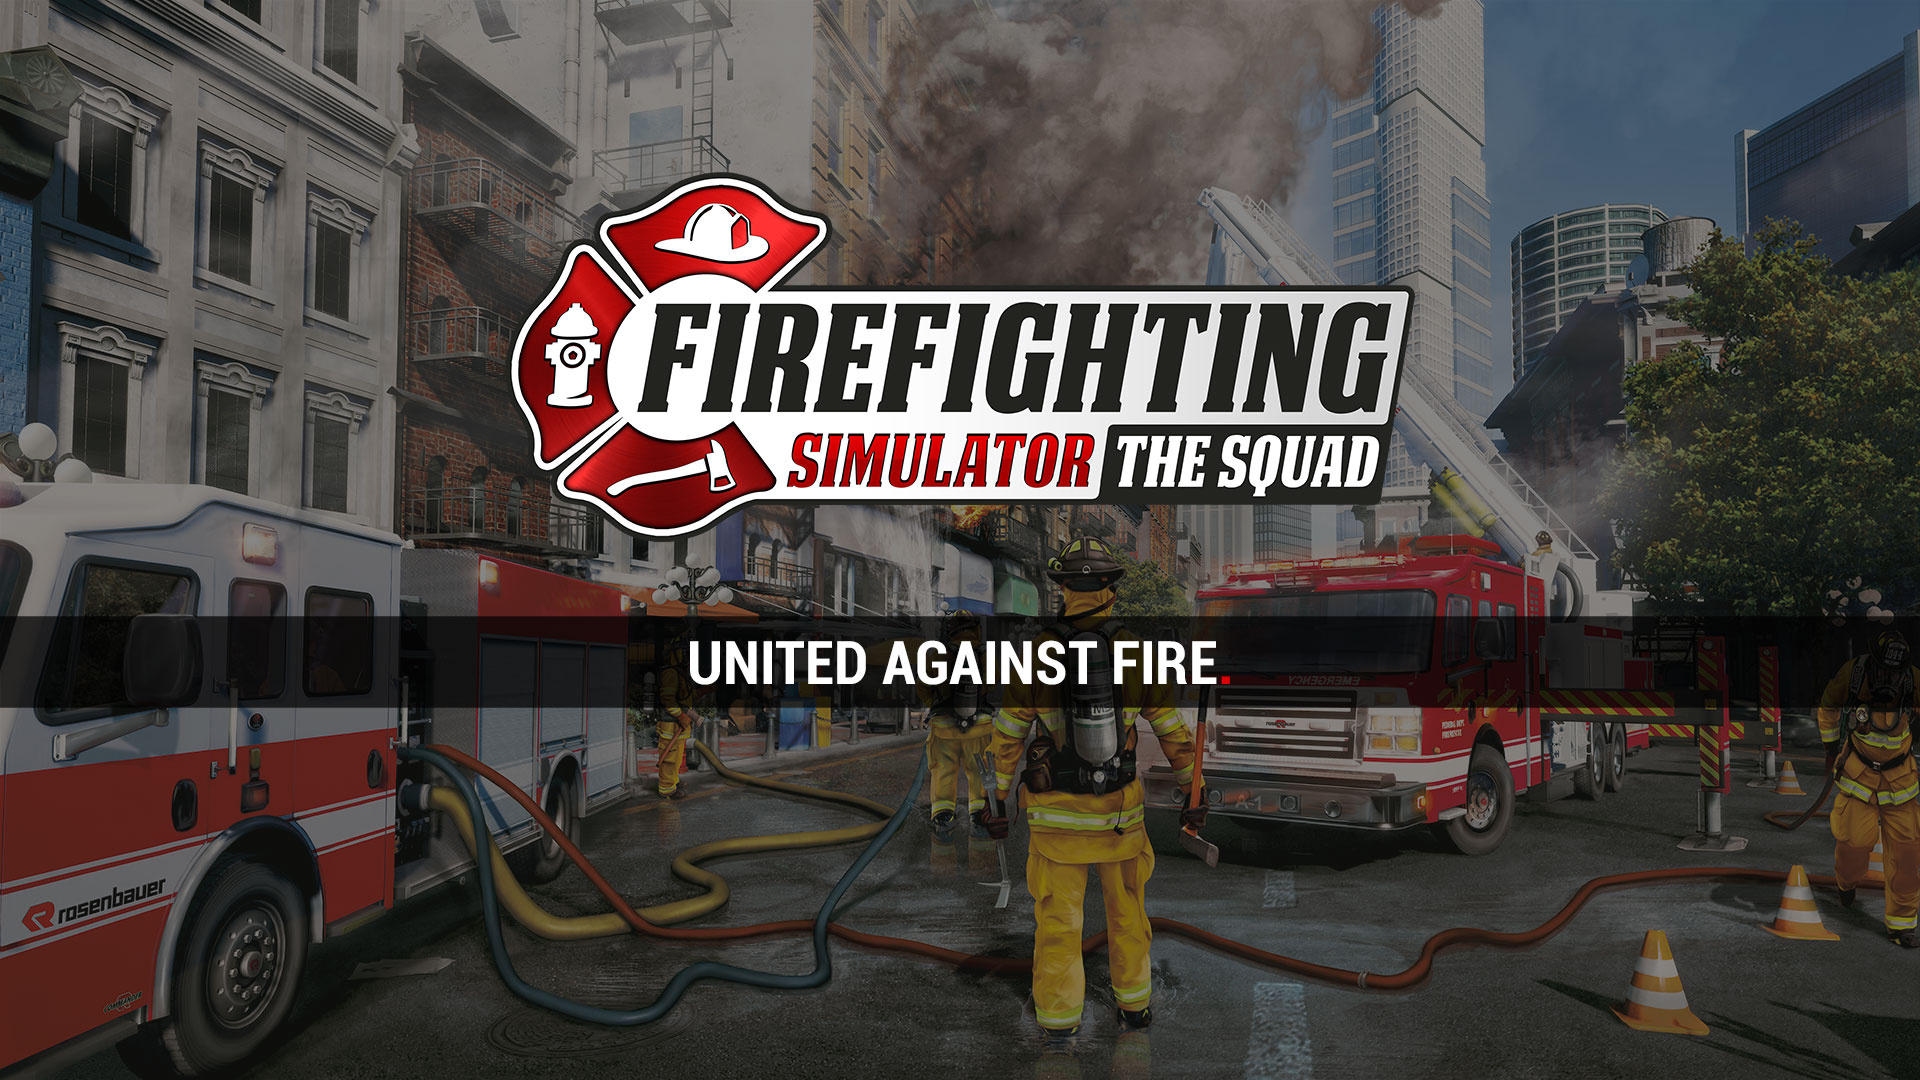 Firefighting Simulator The Squad United Against Fire - firefighter games on roblox